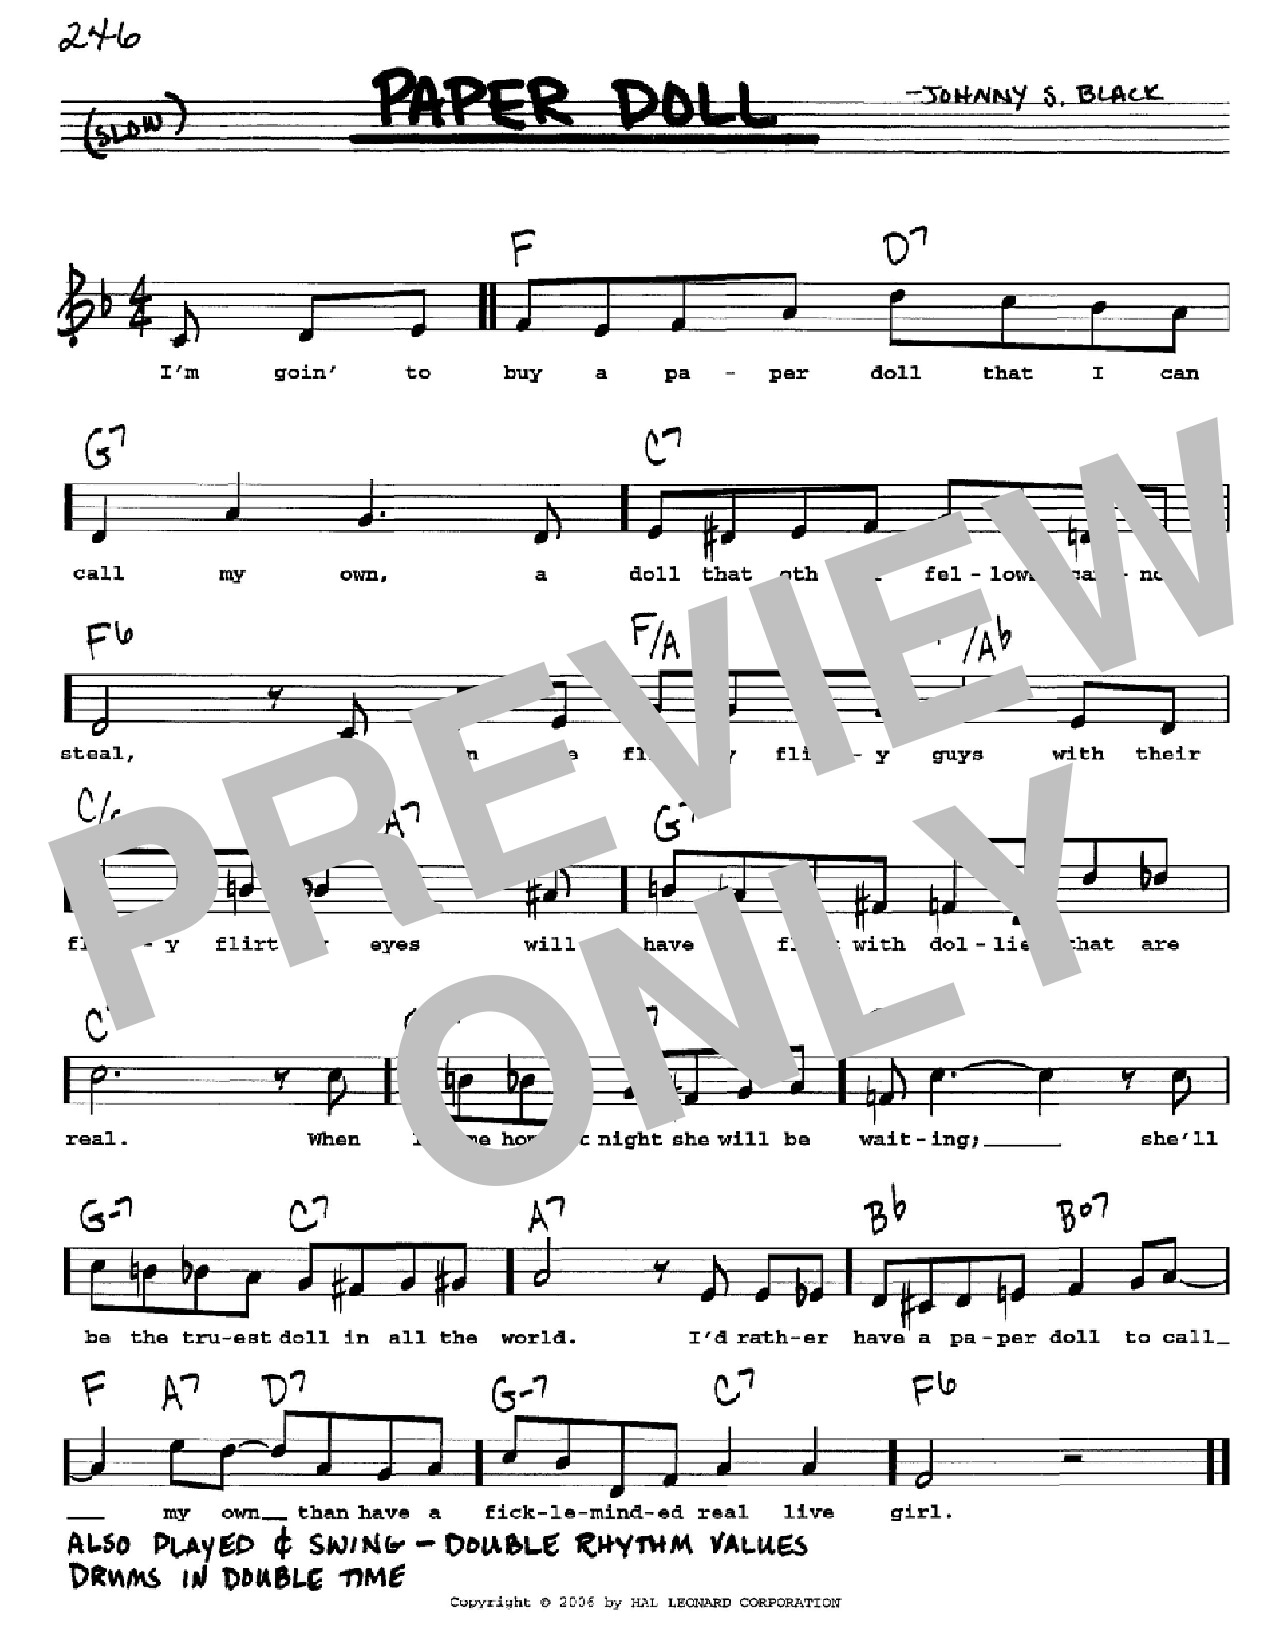 Download Johnny S. Black Paper Doll Sheet Music